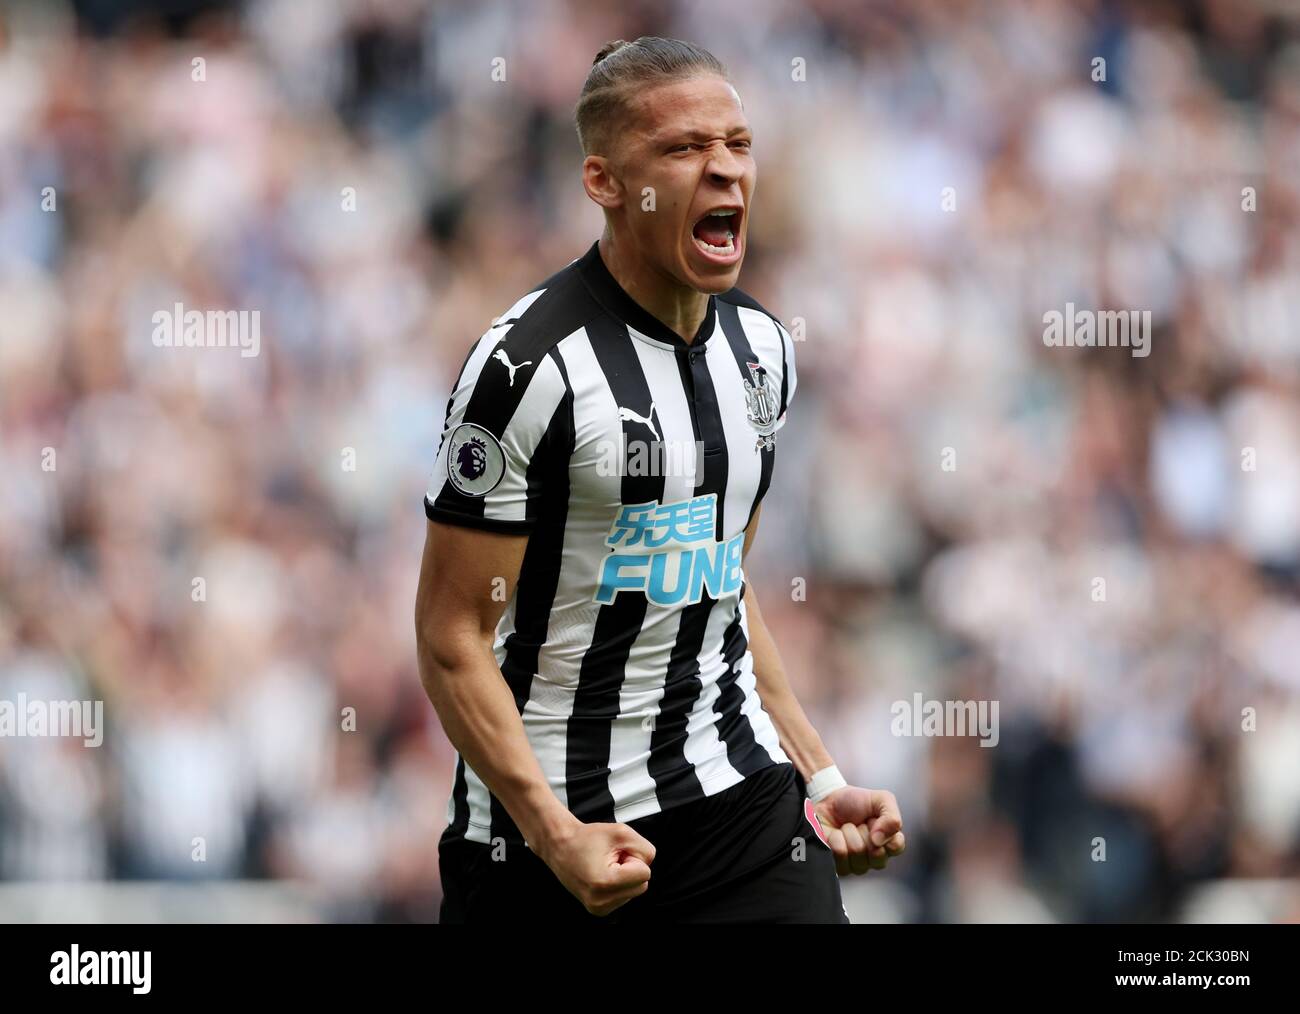 Soccer Football - Premier League - Newcastle United vs Chelsea - St James' Park, Newcastle, Britain - May 13, 2018   Newcastle United's Dwight Gayle celebrates scoring their first goal   REUTERS/Scott Heppell    EDITORIAL USE ONLY. No use with unauthorized audio, video, data, fixture lists, club/league logos or 'live' services. Online in-match use limited to 75 images, no video emulation. No use in betting, games or single club/league/player publications.  Please contact your account representative for further details. Stock Photo